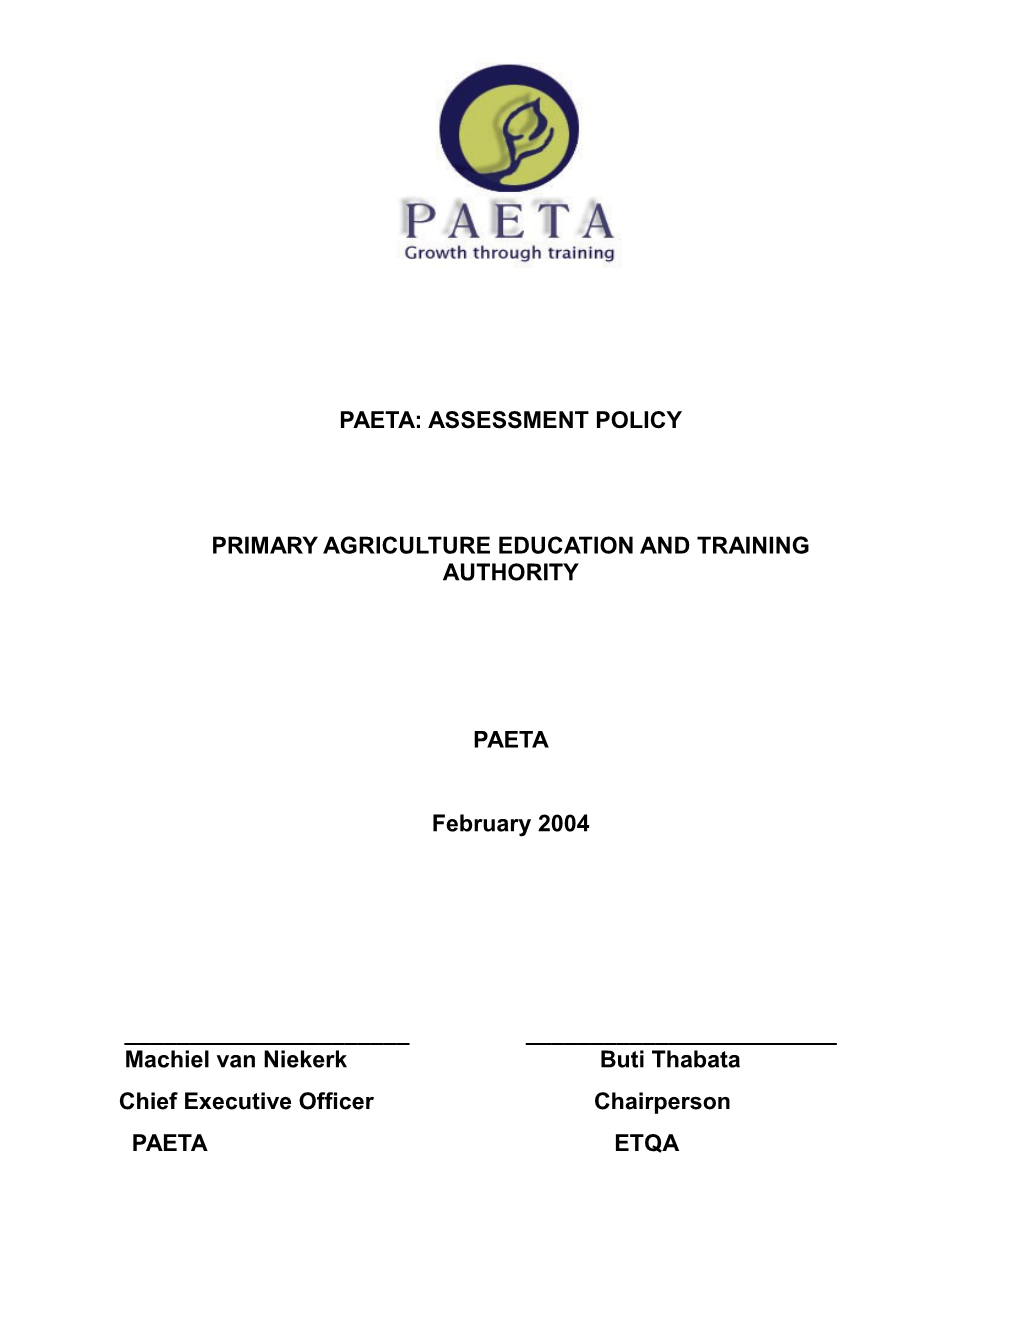 Primary Agriculture Education and Training Authority